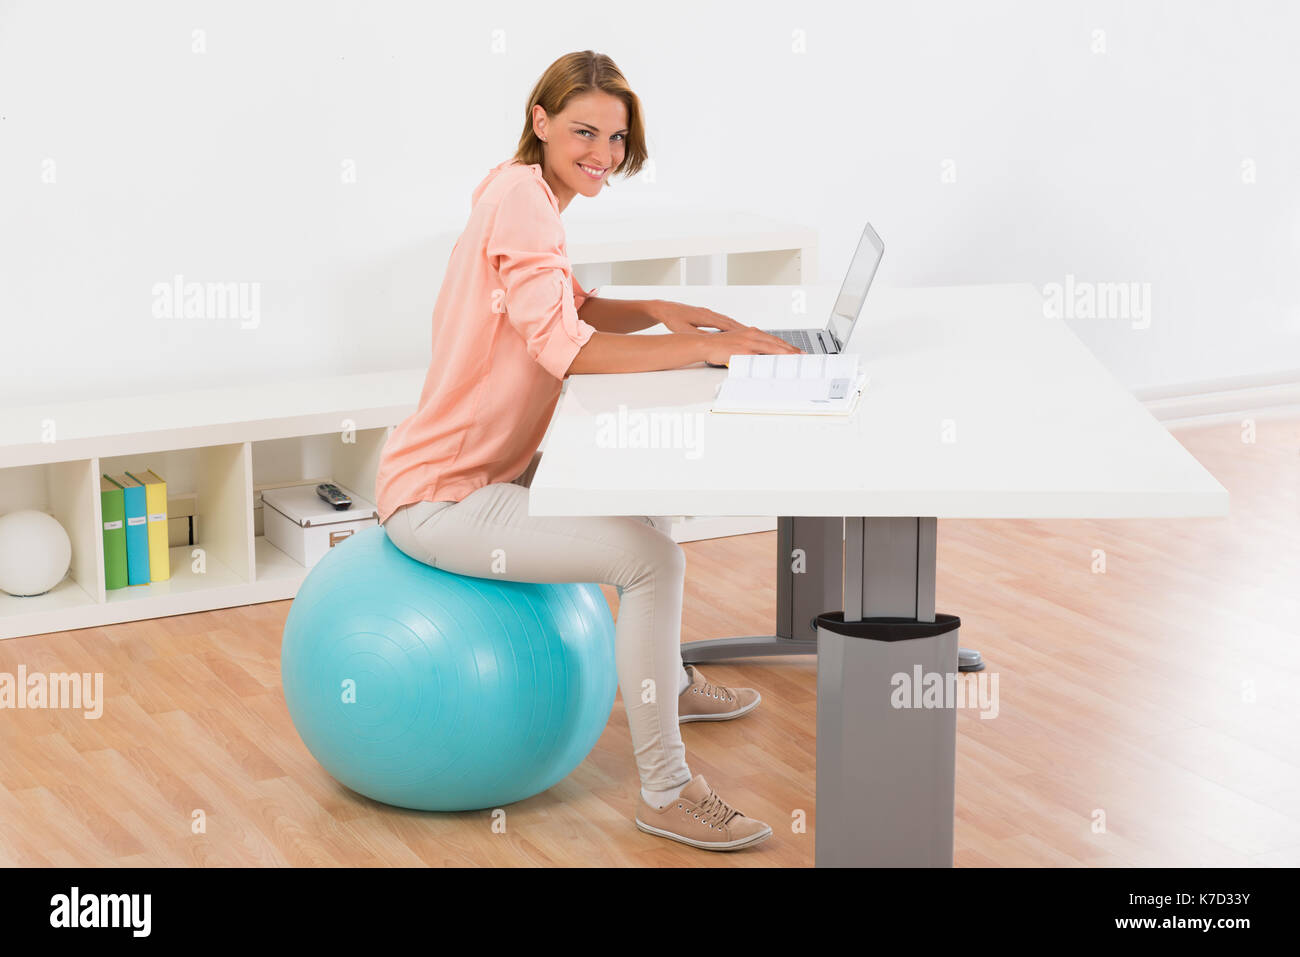 Young Woman Sitting On Blue Fitness Ball Using Laptop At Desk